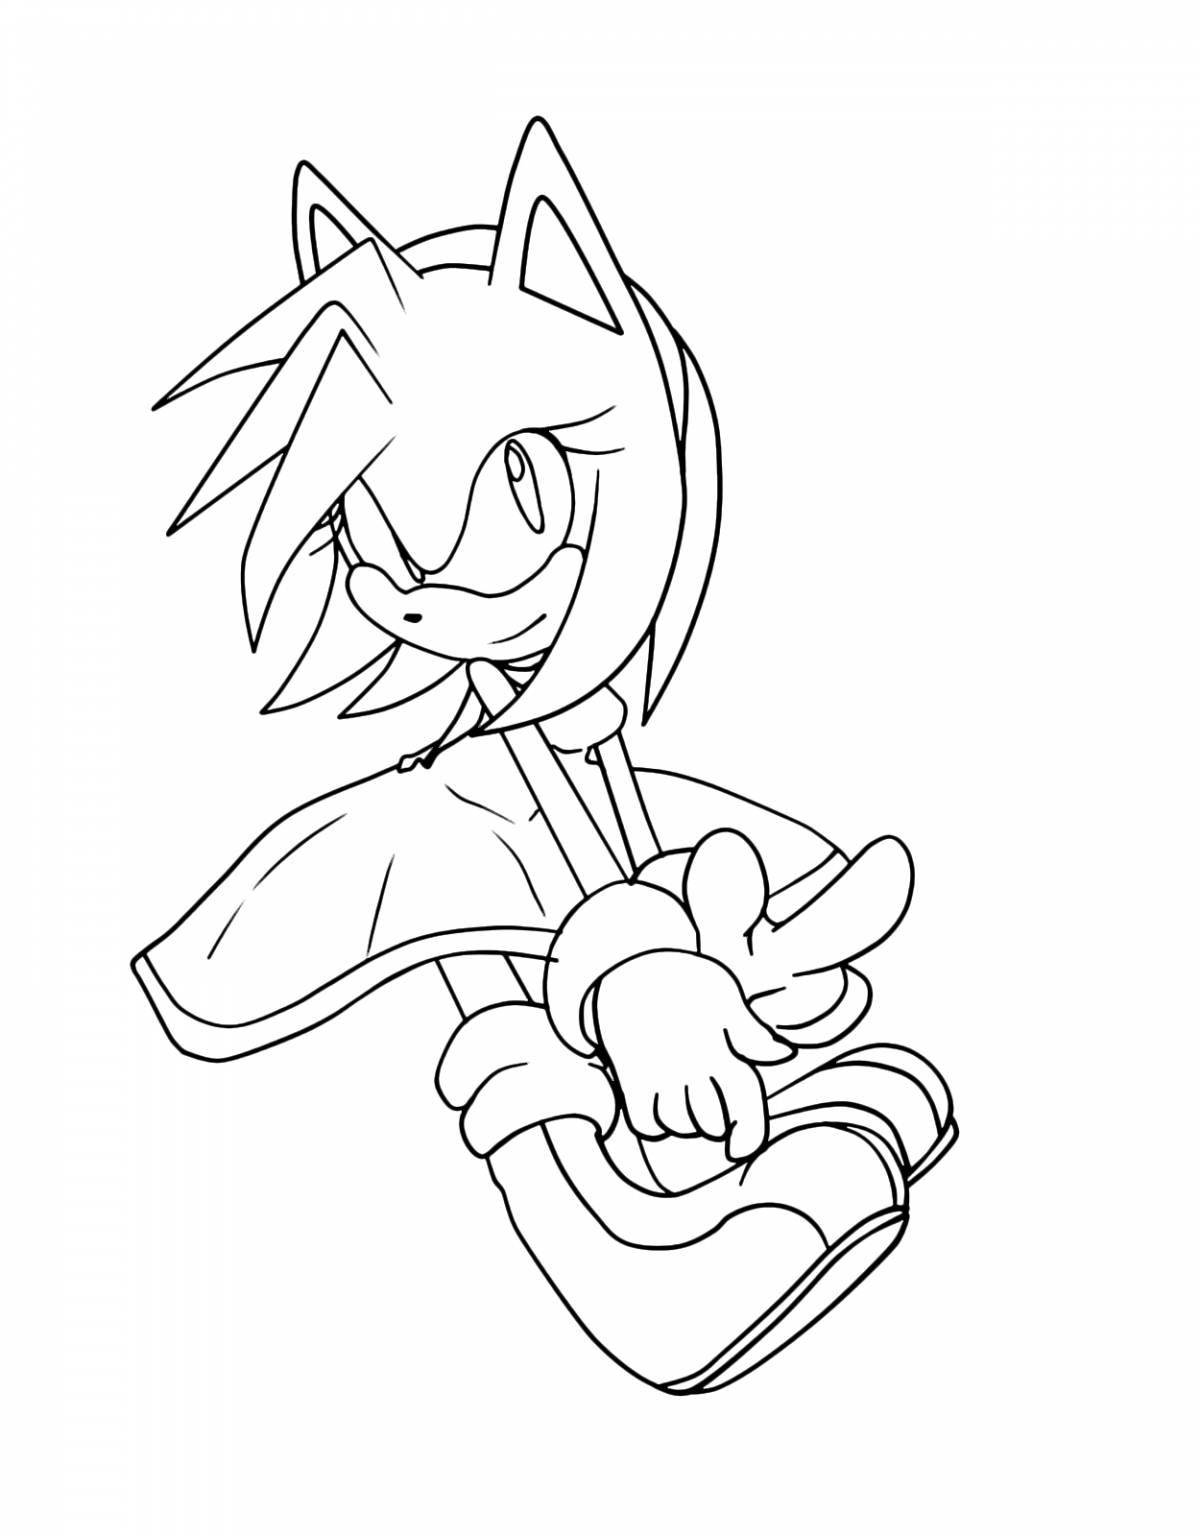 Colorful sonic amy coloring book